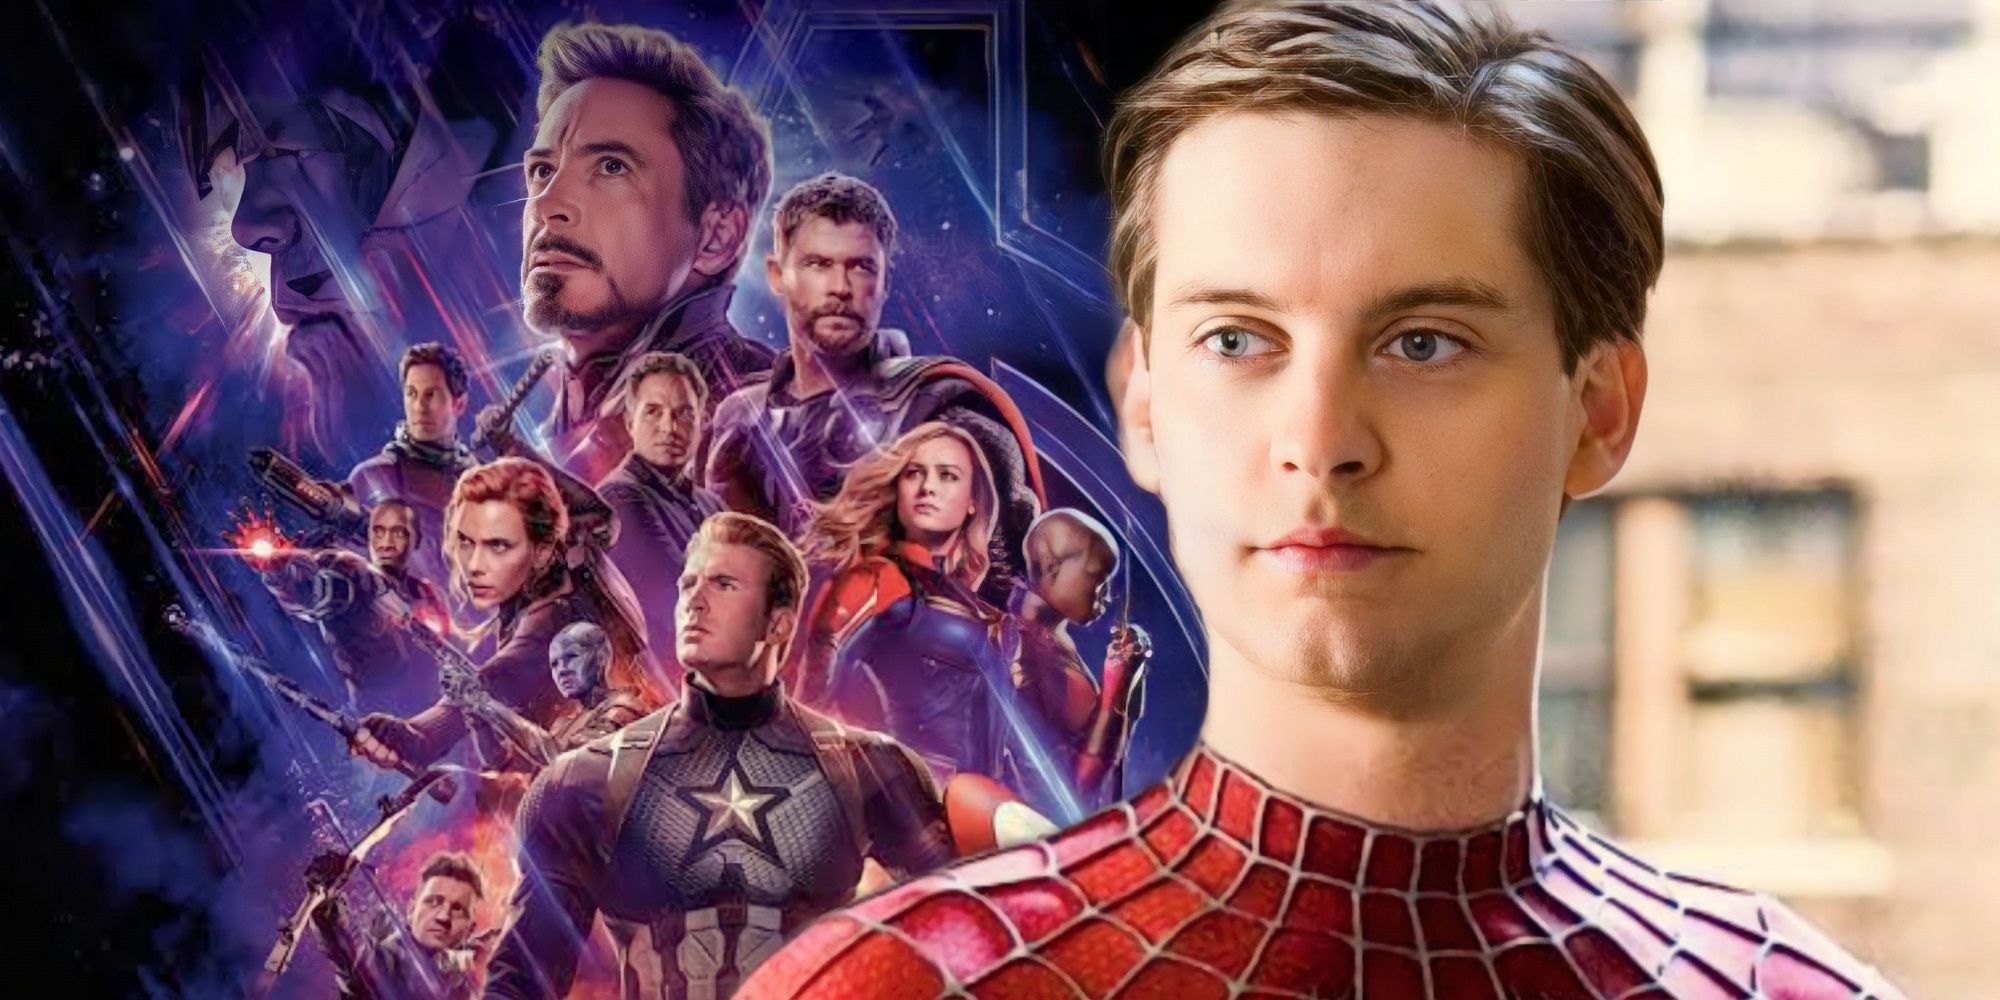 Tobey Maguire in Sam Raimi's Spider-Man and an Avengers: Endgame poster